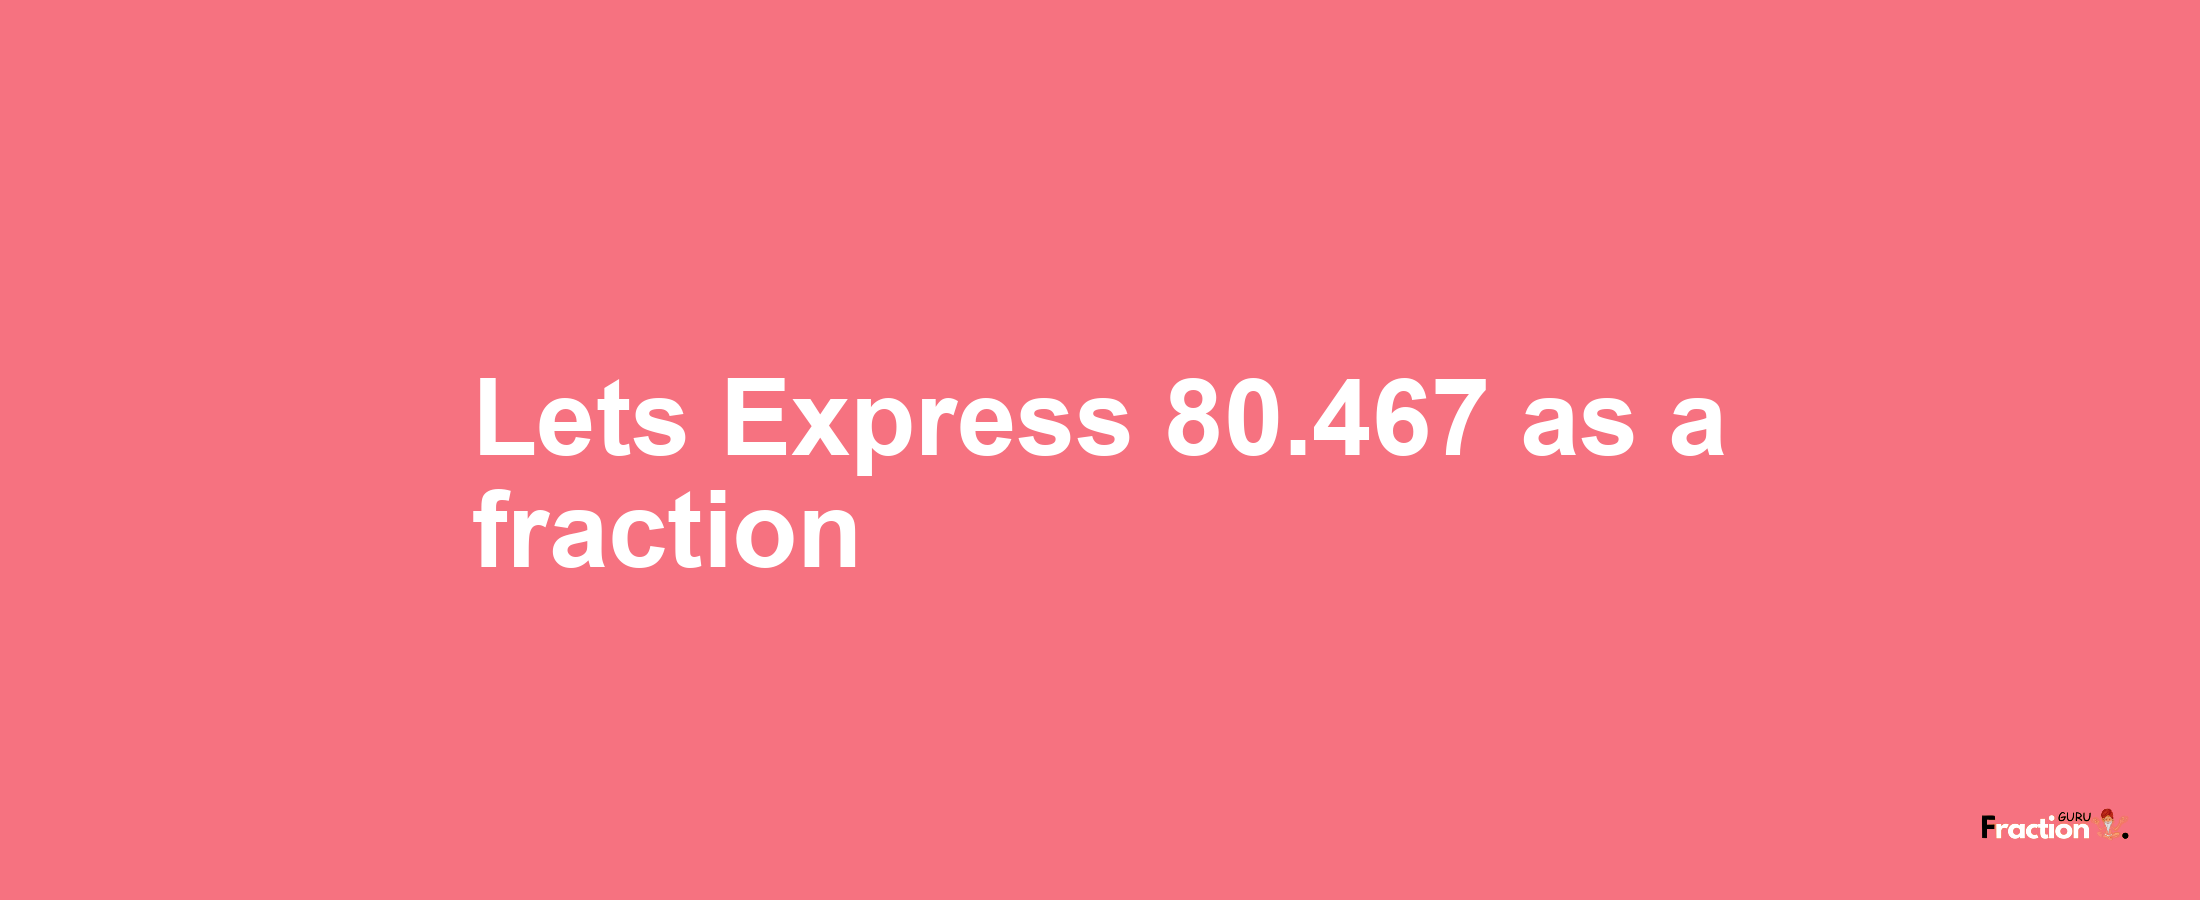 Lets Express 80.467 as afraction